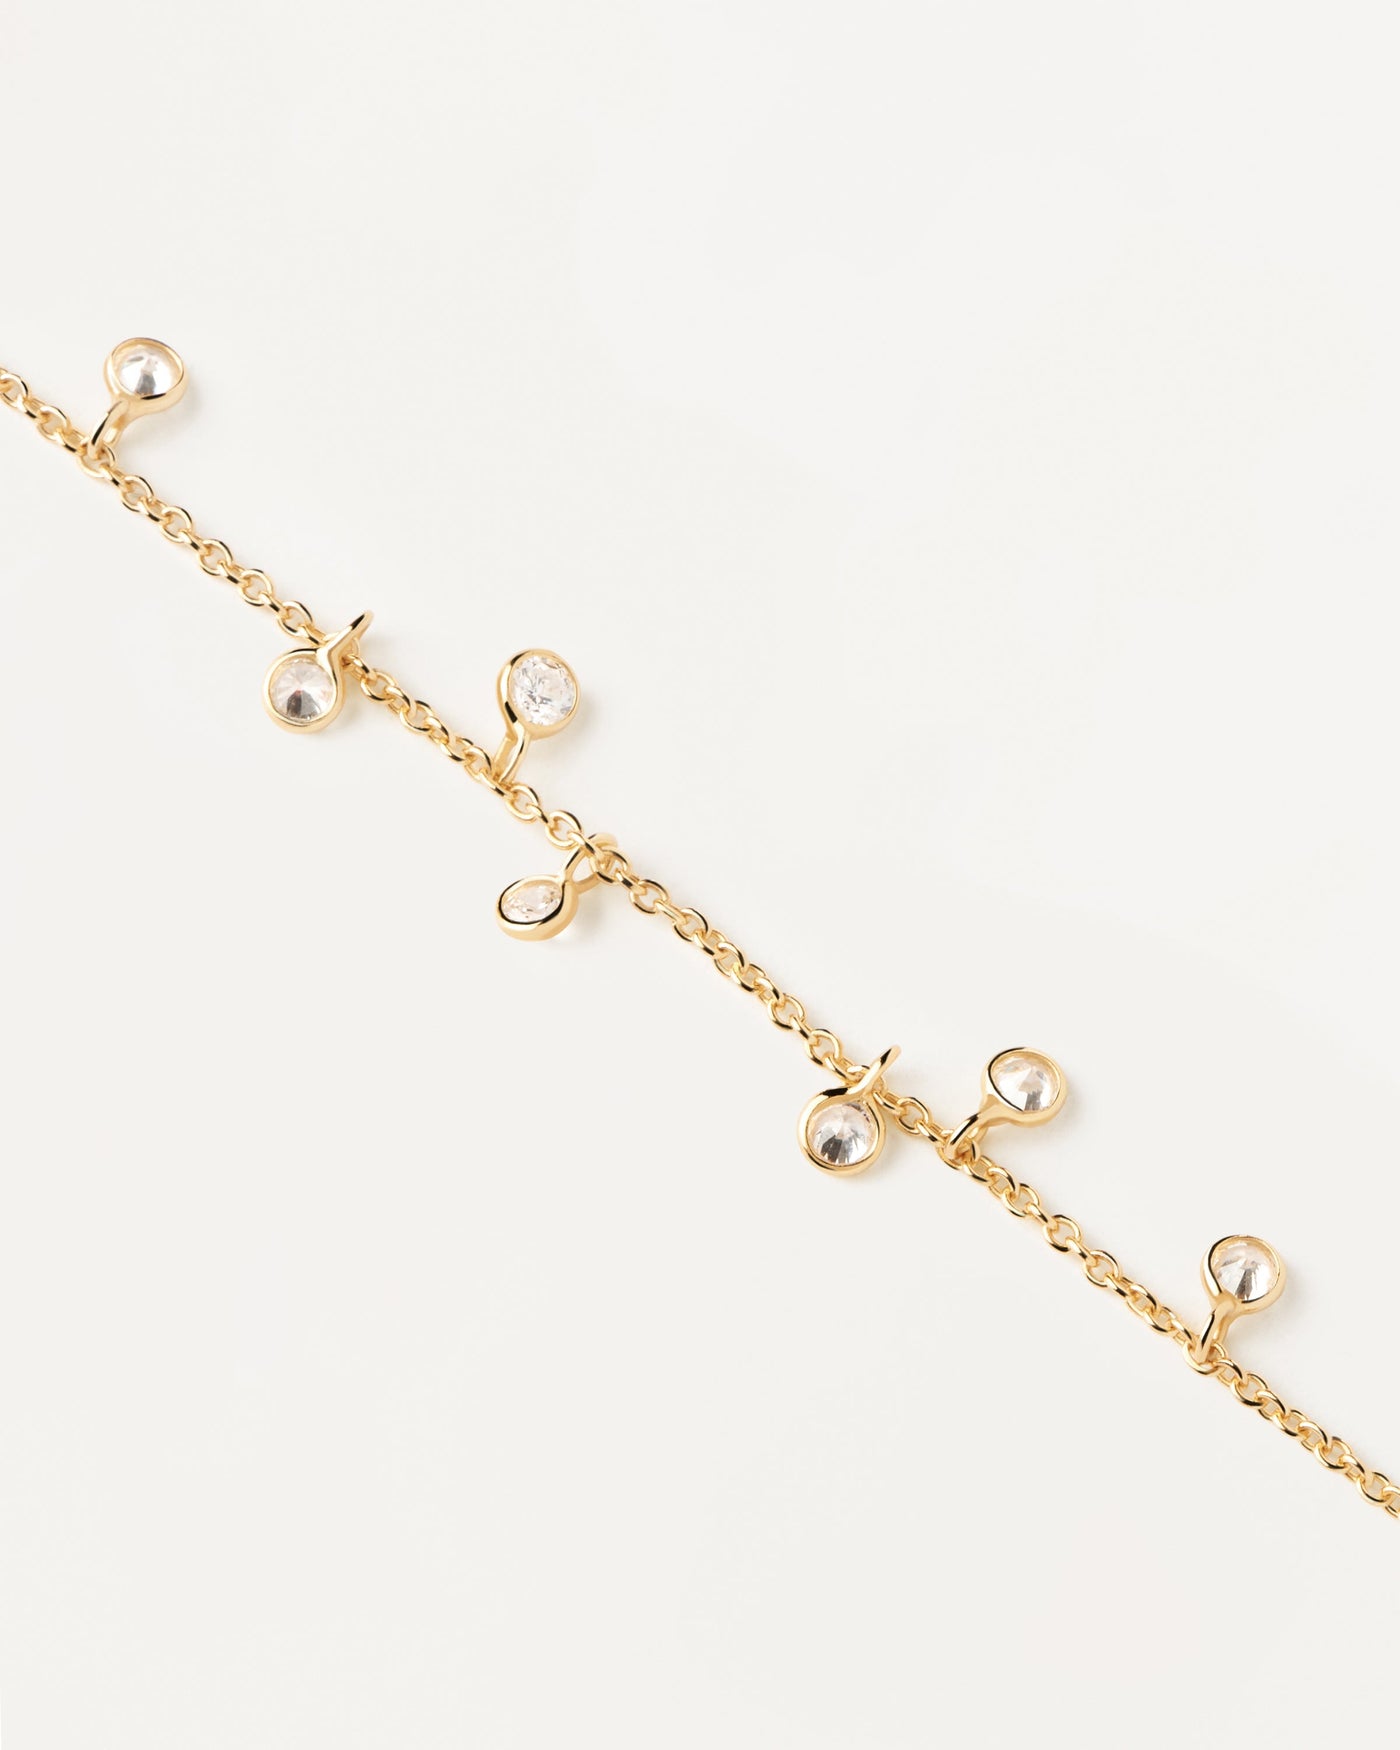 2023 Selection | Bliss Bracelet. Bright bracelet with zirconia pendants set in gold circles of gold-plated silver. Get the latest arrival from PDPAOLA. Place your order safely and get this Best Seller. Free Shipping.